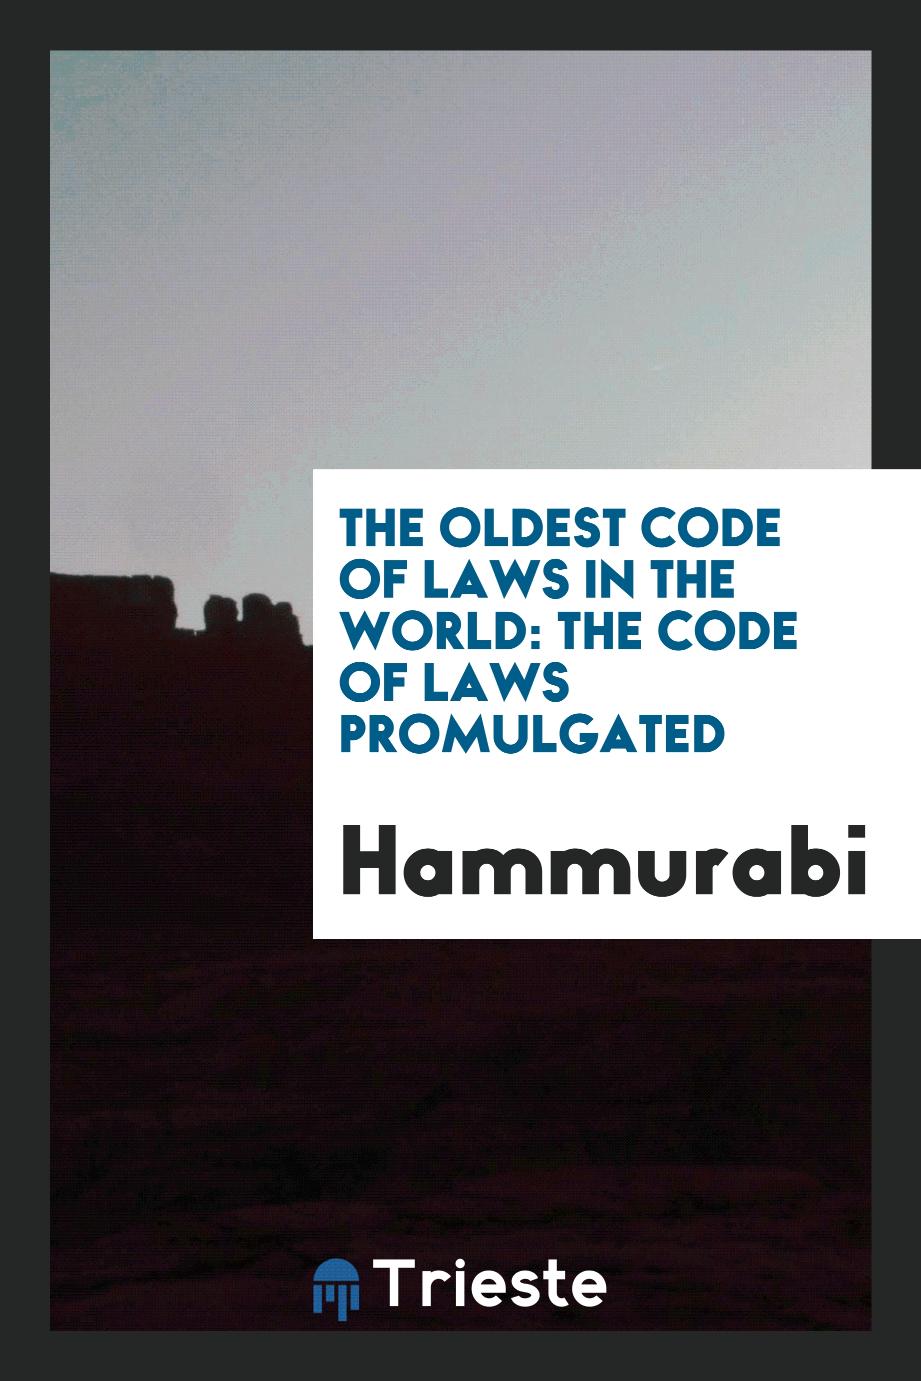 The Oldest Code of Laws in the World: The Code of Laws Promulgated